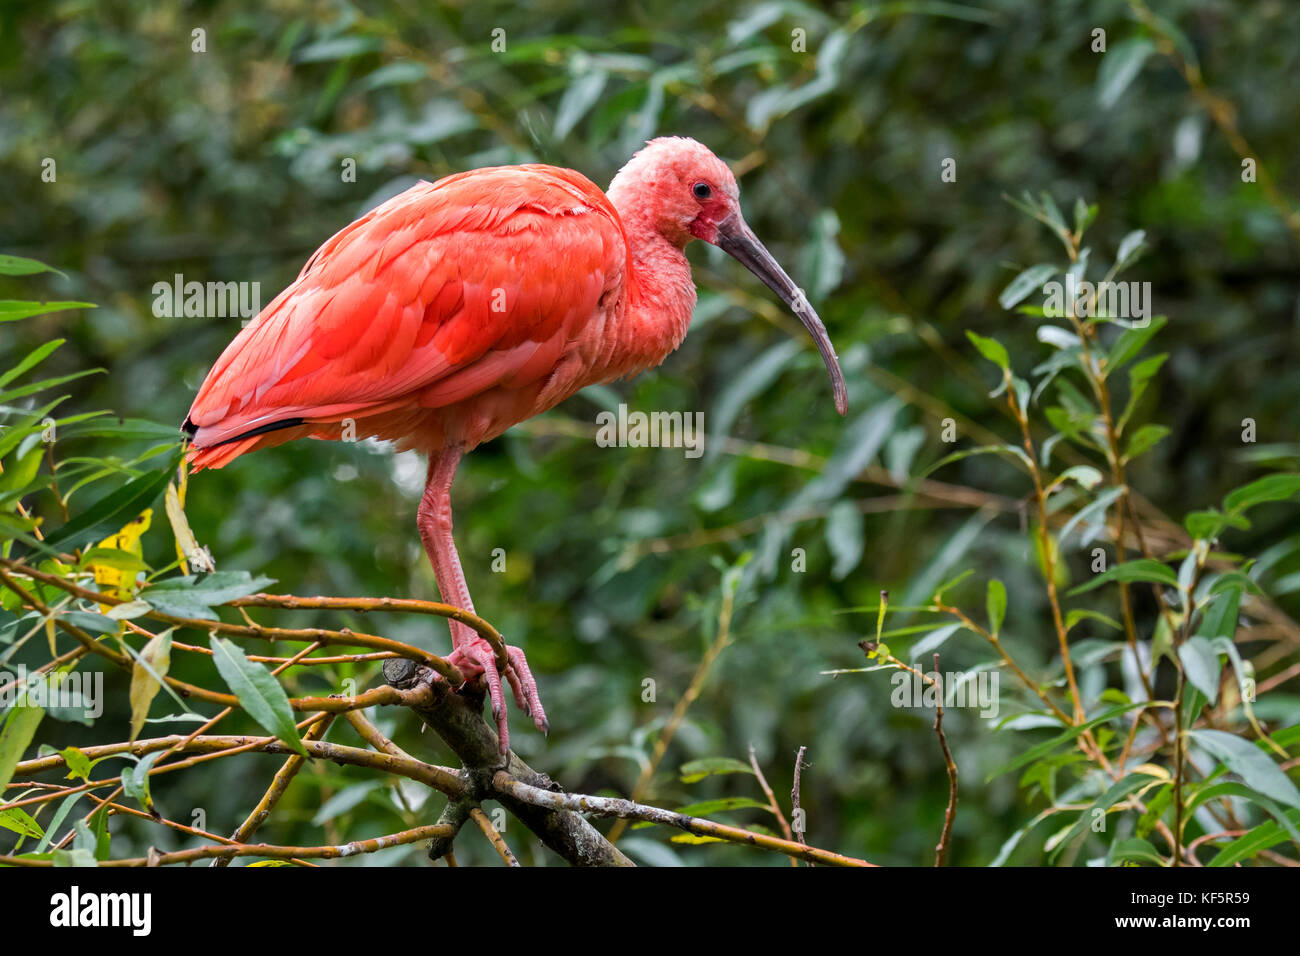 Scarlet ibis (Eudocimus ruber) perched in tree, native to tropical South America and islands of the Caribbean Stock Photo